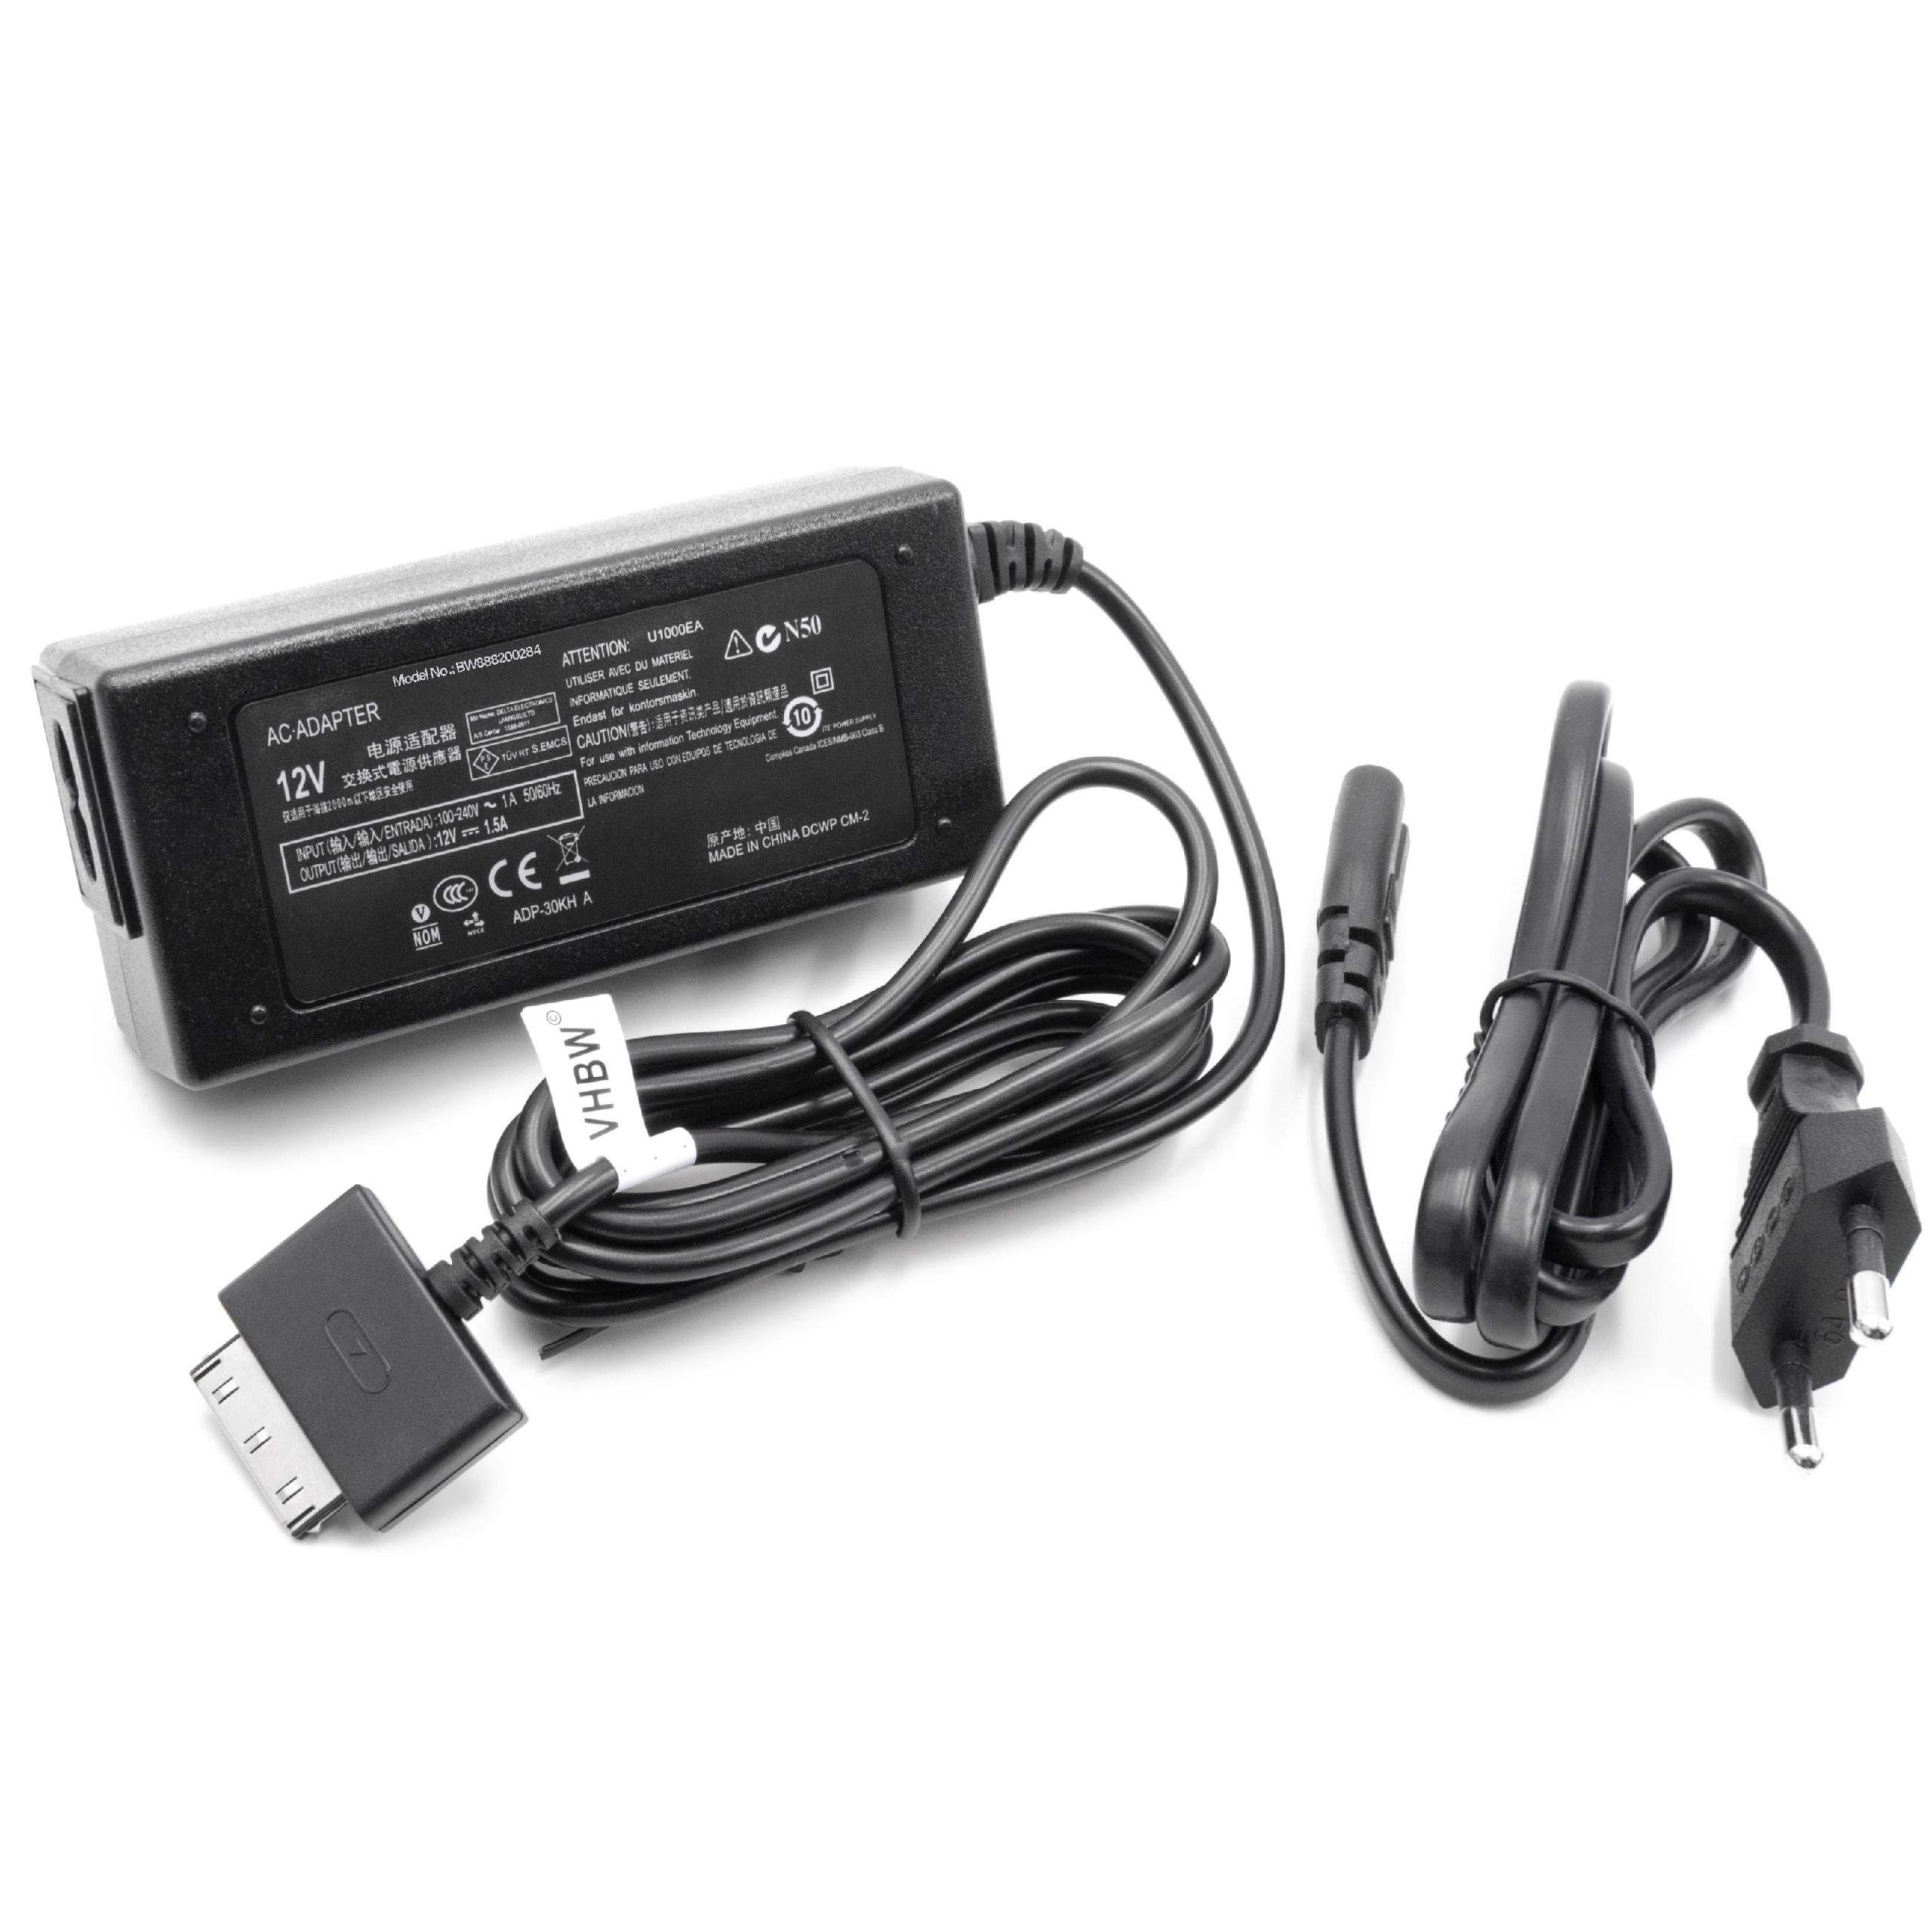 Mains Power Adapter replaces Acer NP.ADT11.00D, NC.20411.01A, KP.01801.003, 27.K2102.001 for Tablet - 230 cm